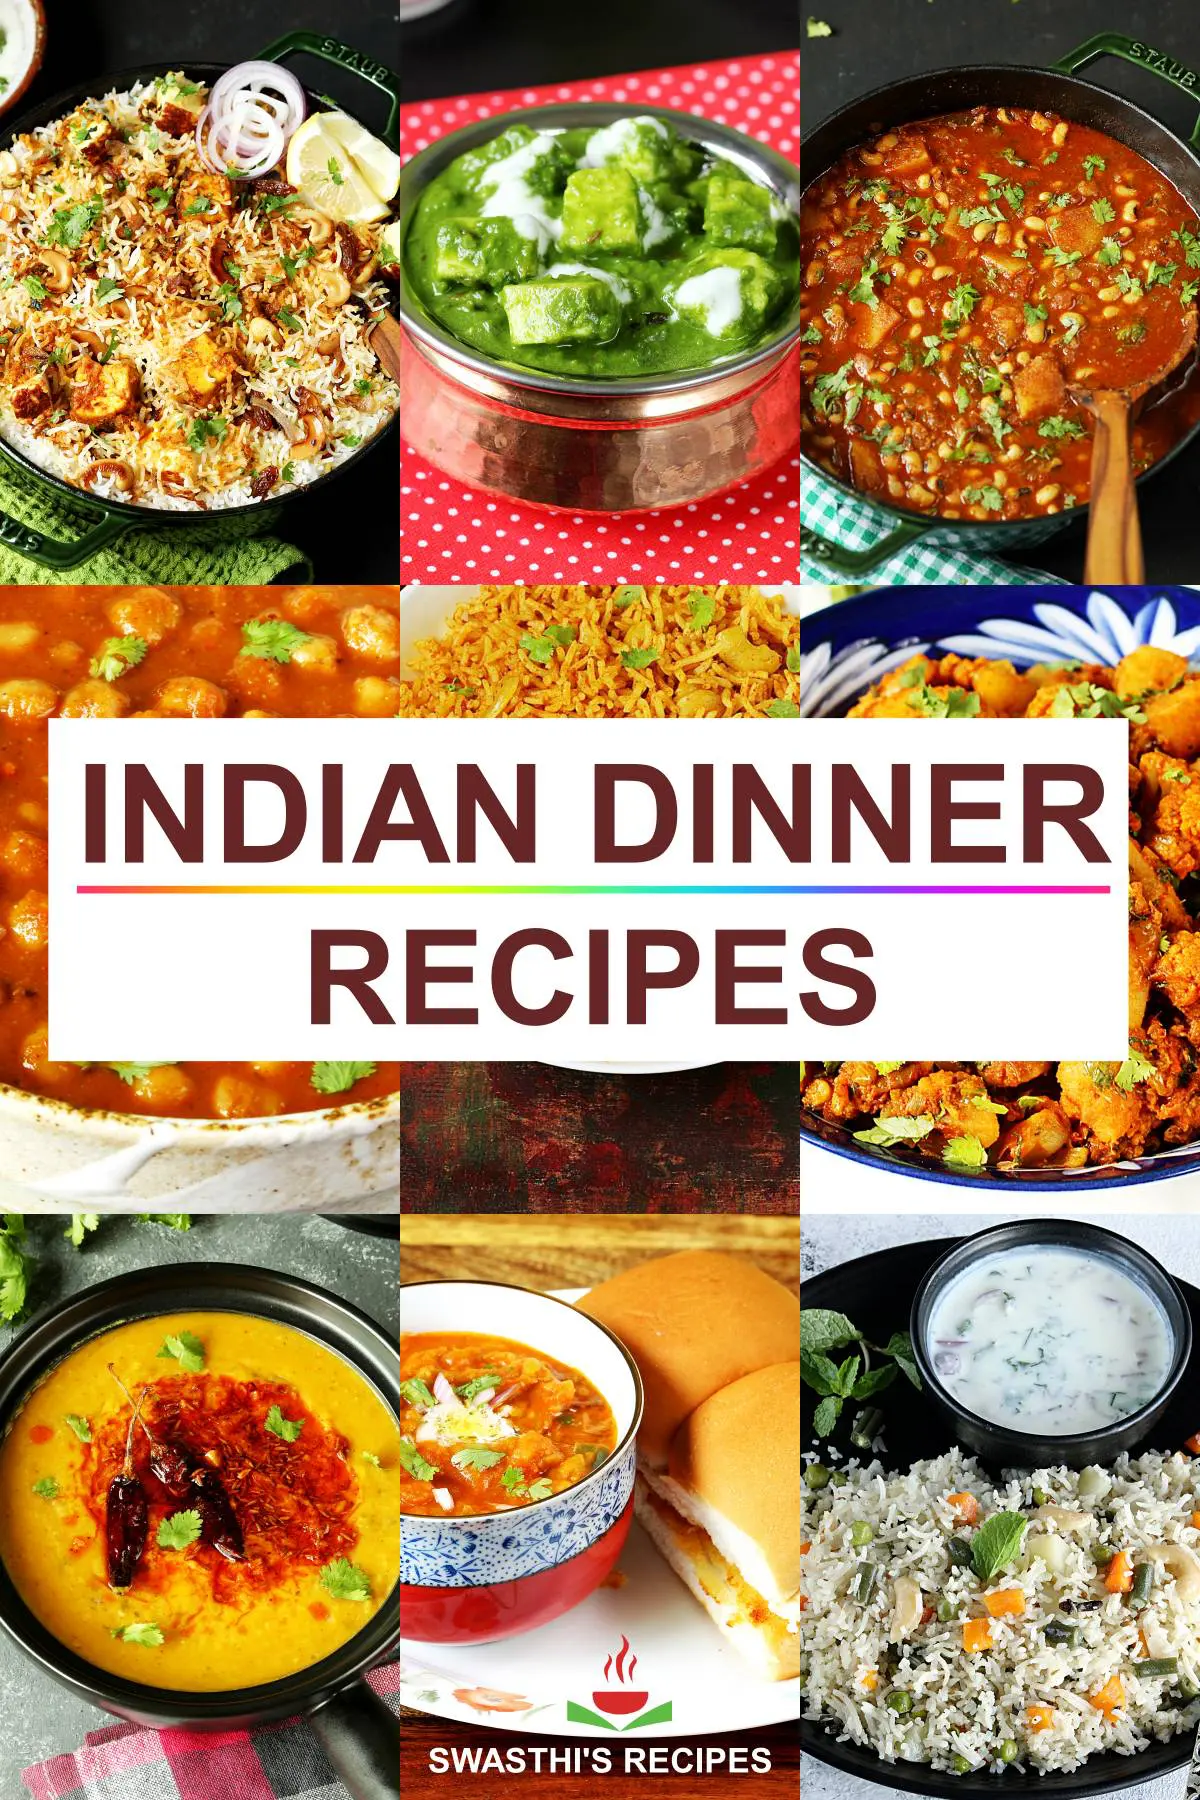 Indian dinner recipes